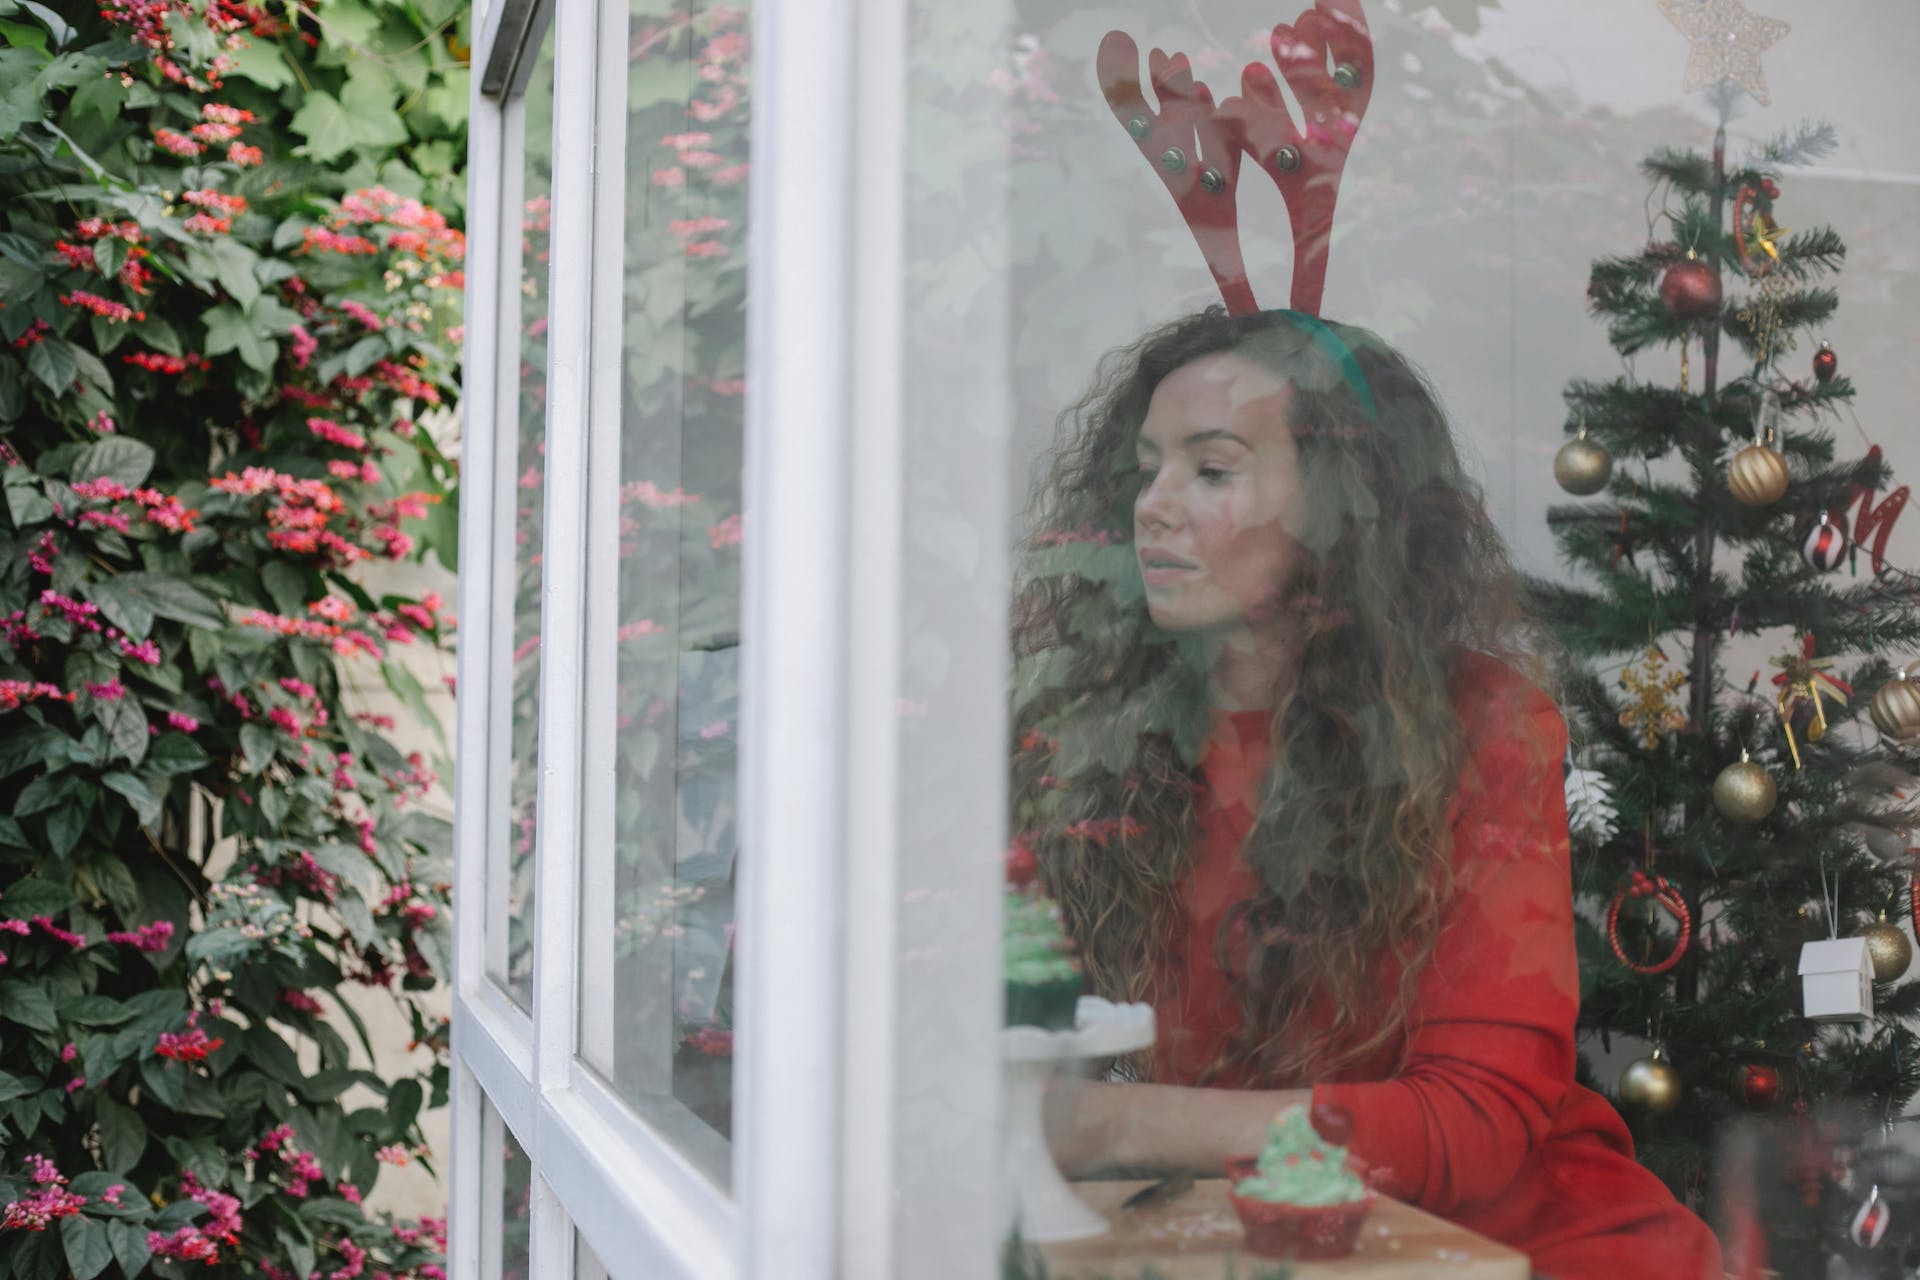 A woman dressed as a reindeer looking outside from her window during Christmastime | Source: Pexels